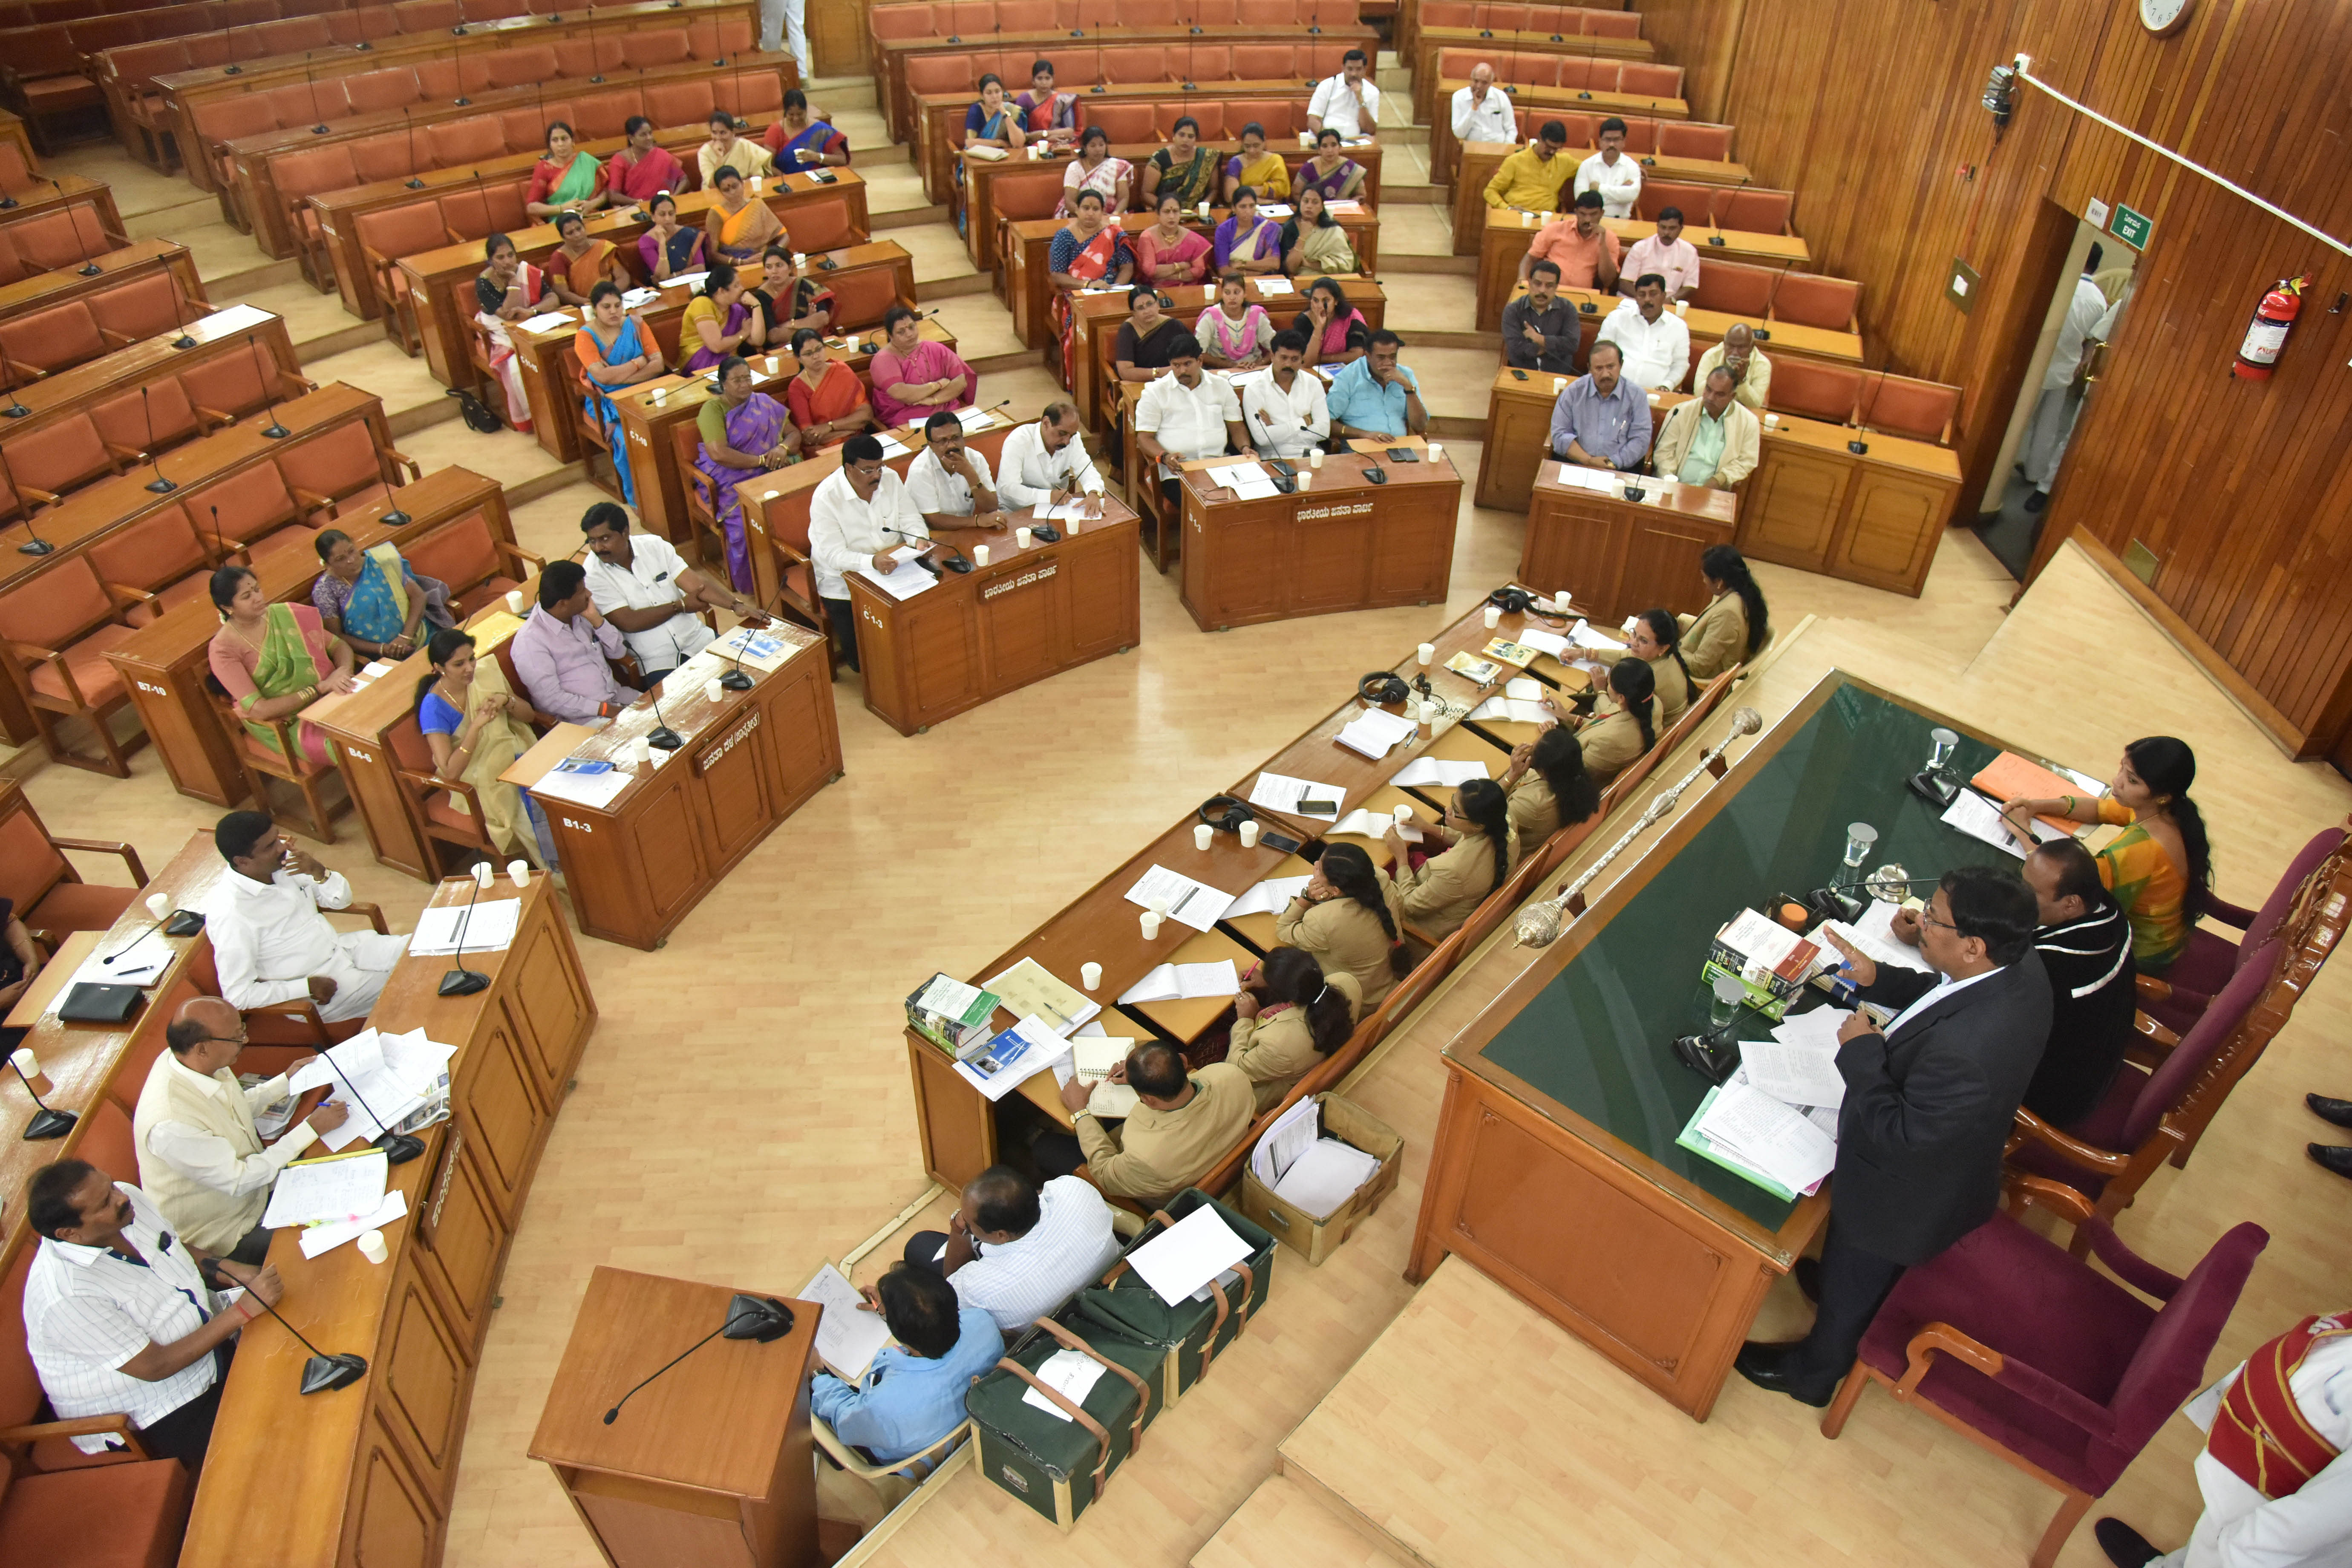 The iPads were given to the corporators to make BBMP council proceedings paperless